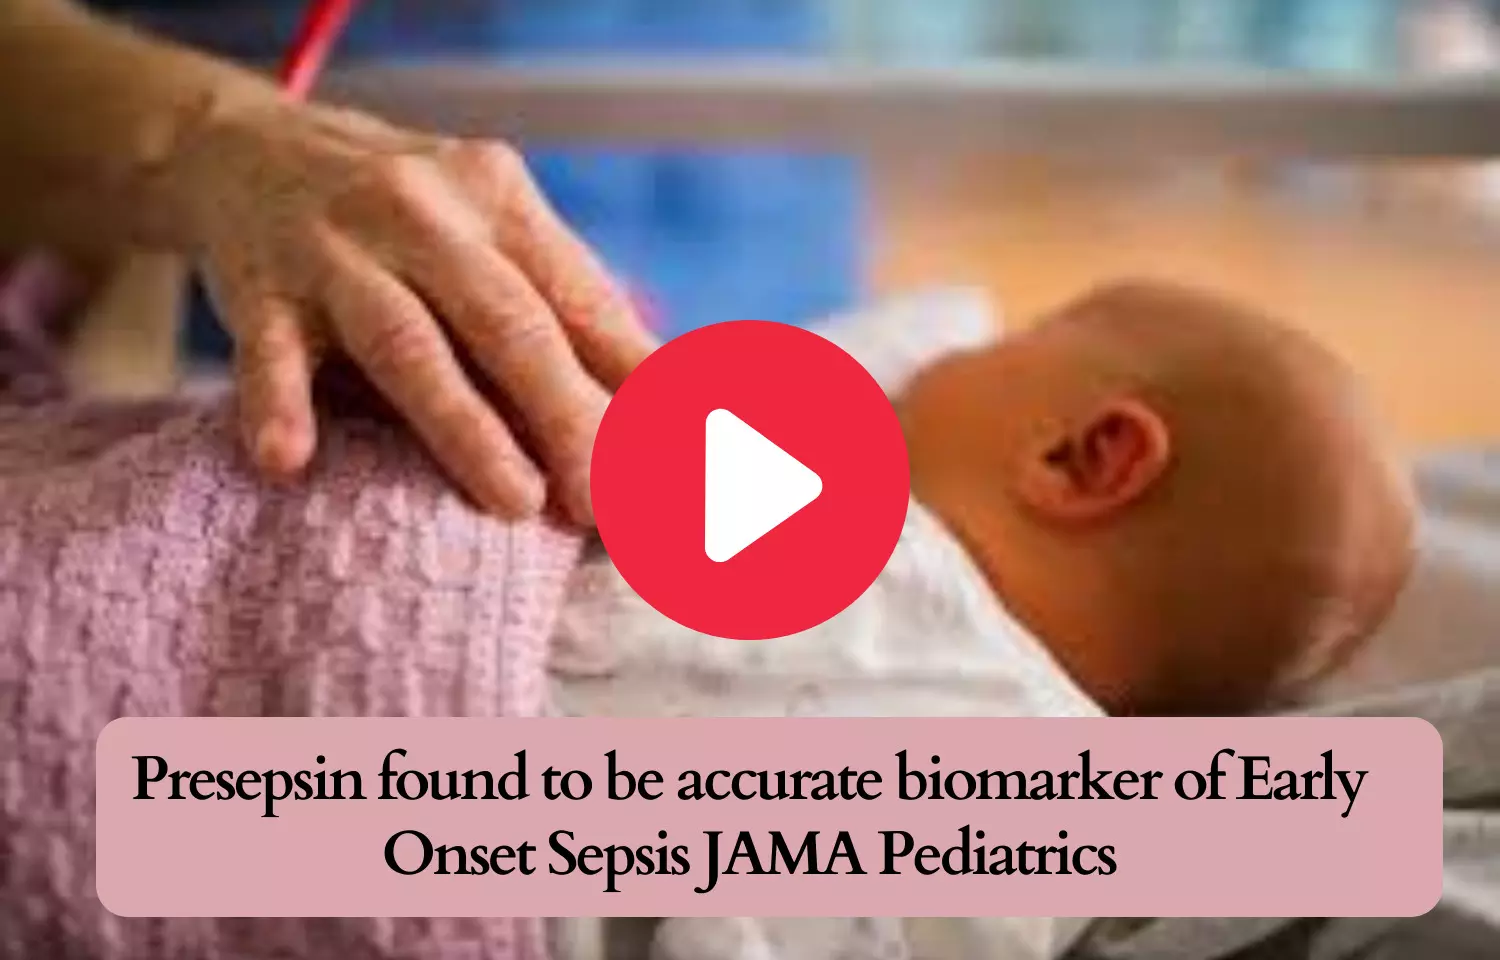 Presepsin found to be accurate biomarker of Early-Onset Sepsis: JAMA Pediatrics